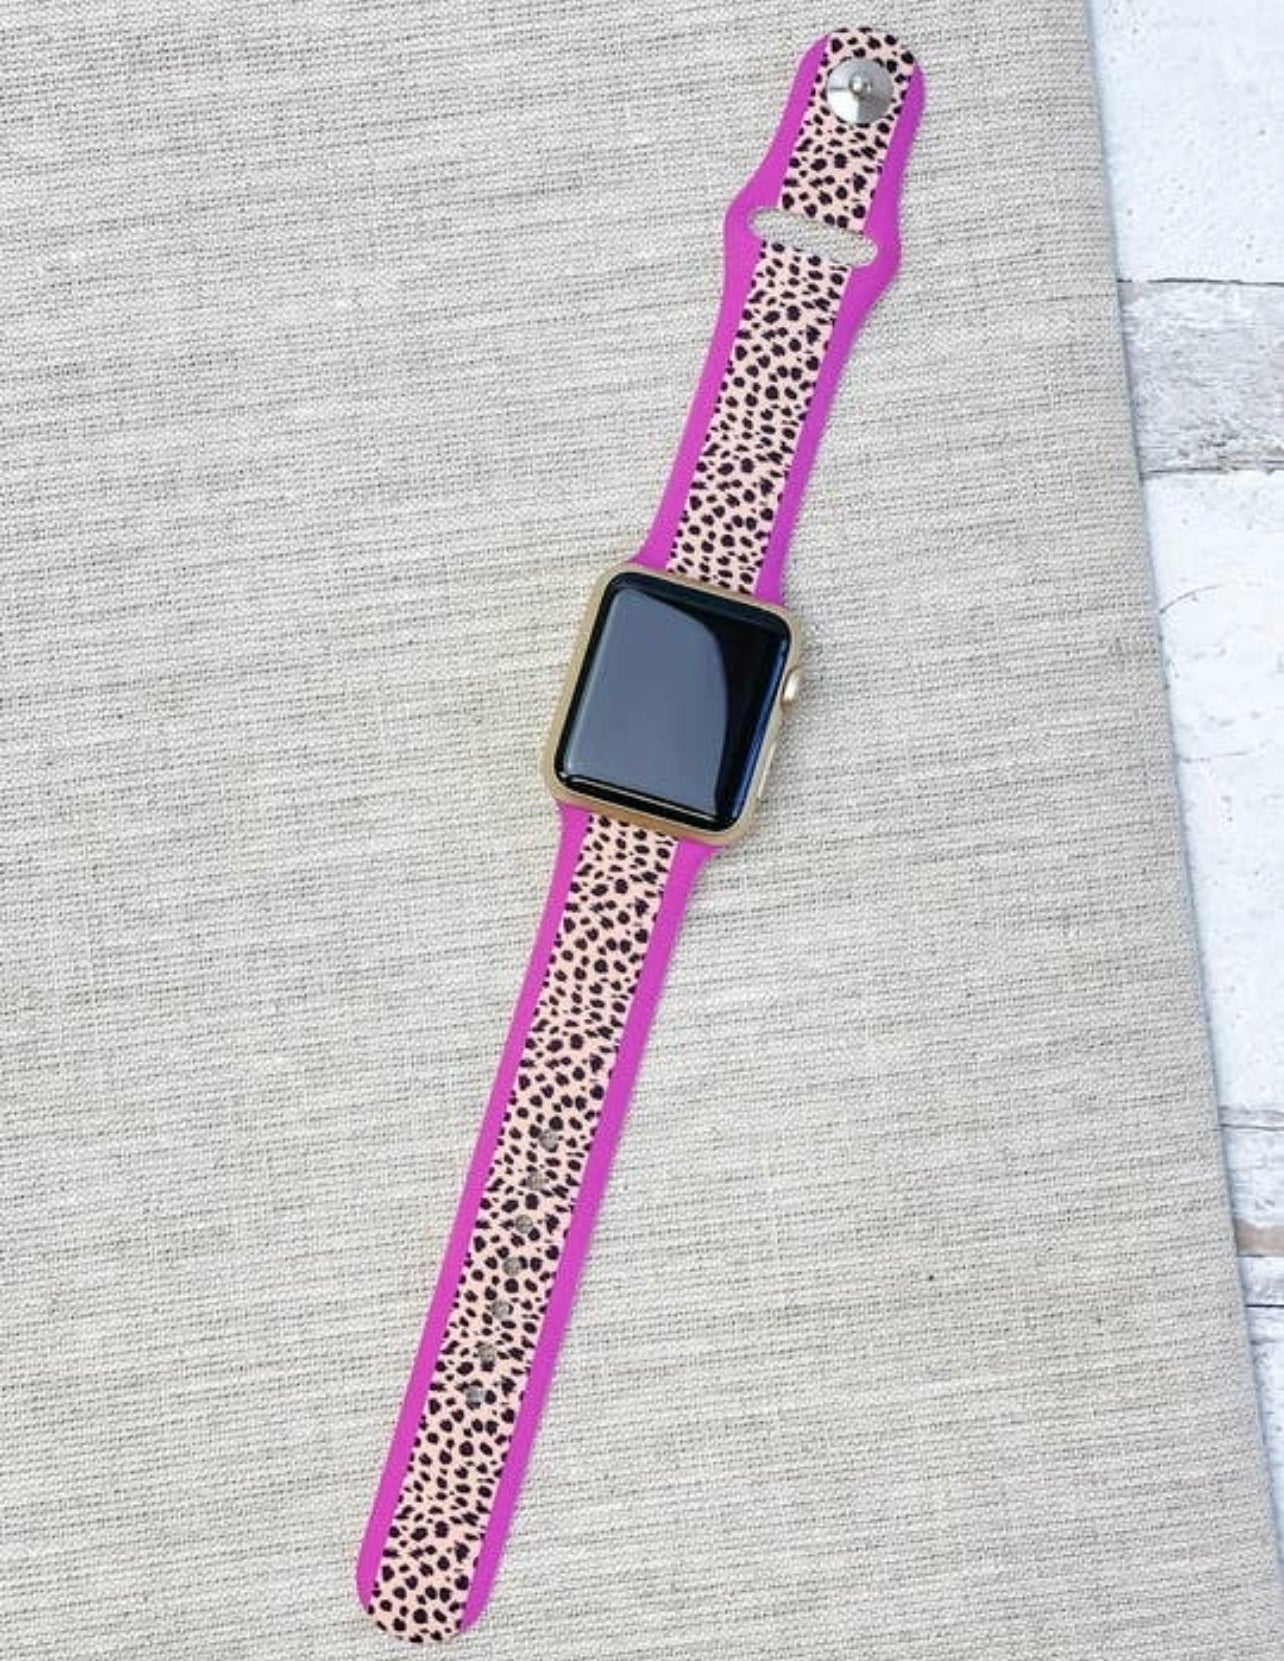 LEOPARD PURPLE STRIPE SILICONE SMART WATCH M/L - Baby Bums Clothing 